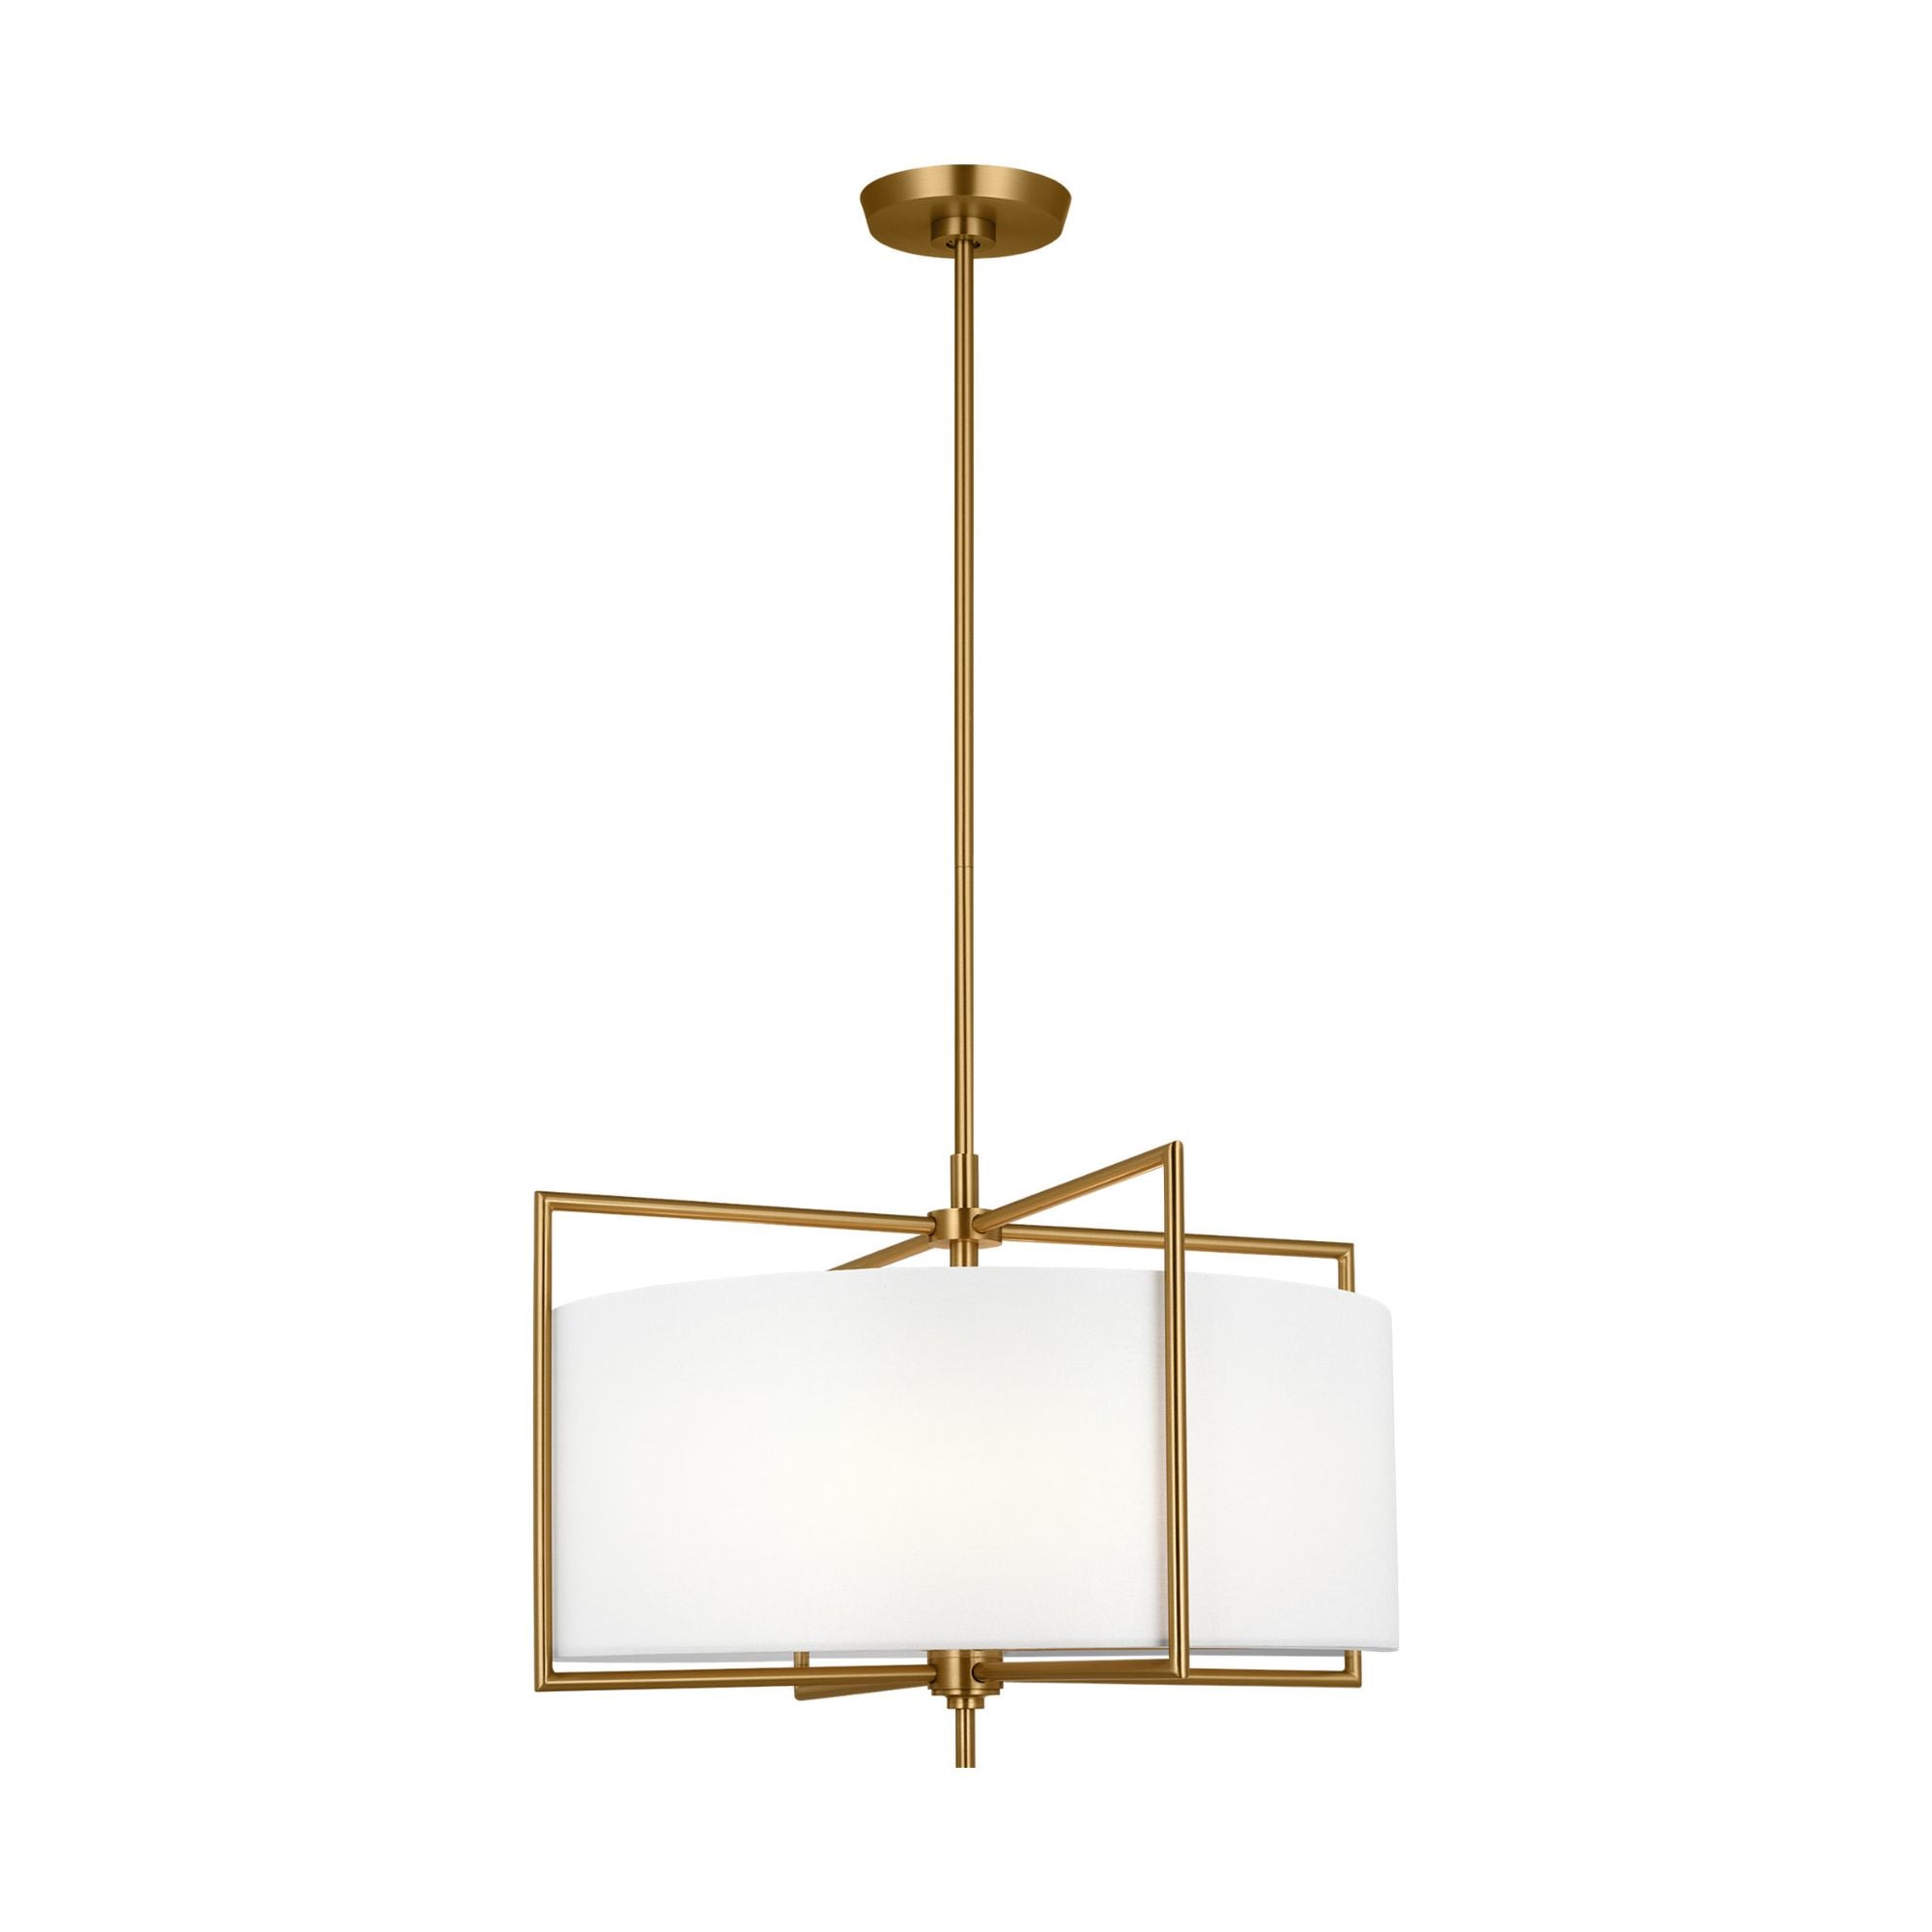 Chapman & Myers Perno Medium Hanging Shade in Burnished Brass